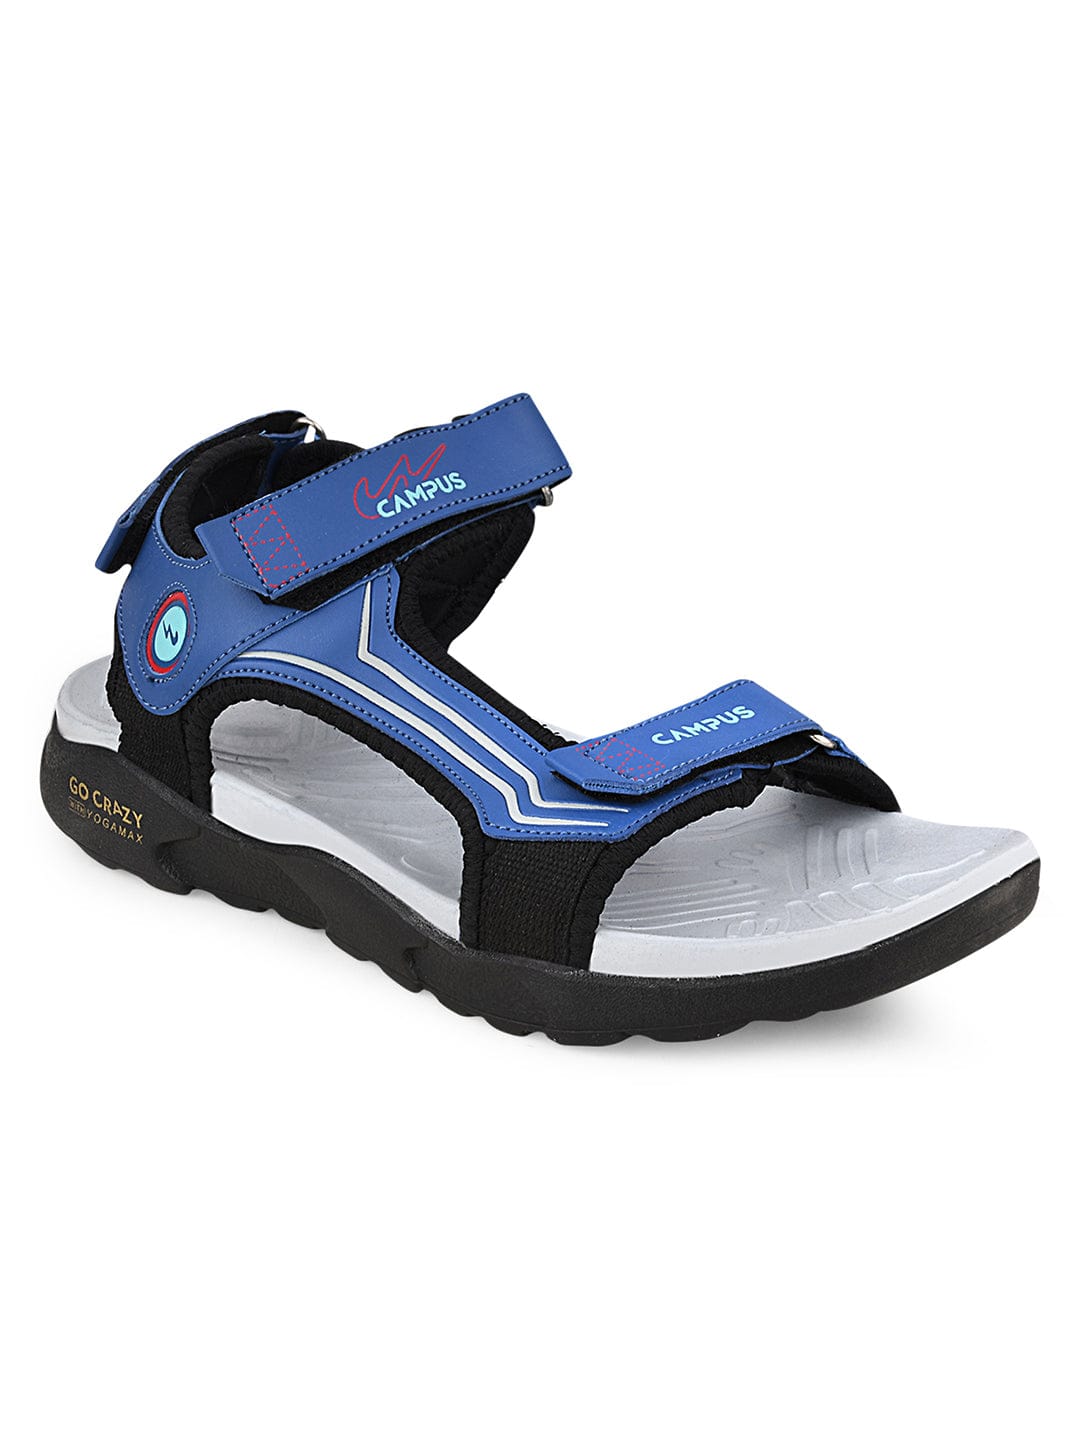 Buy Sandals For Men: Sd-53-Navy-Red-Wht | Campus Shoes